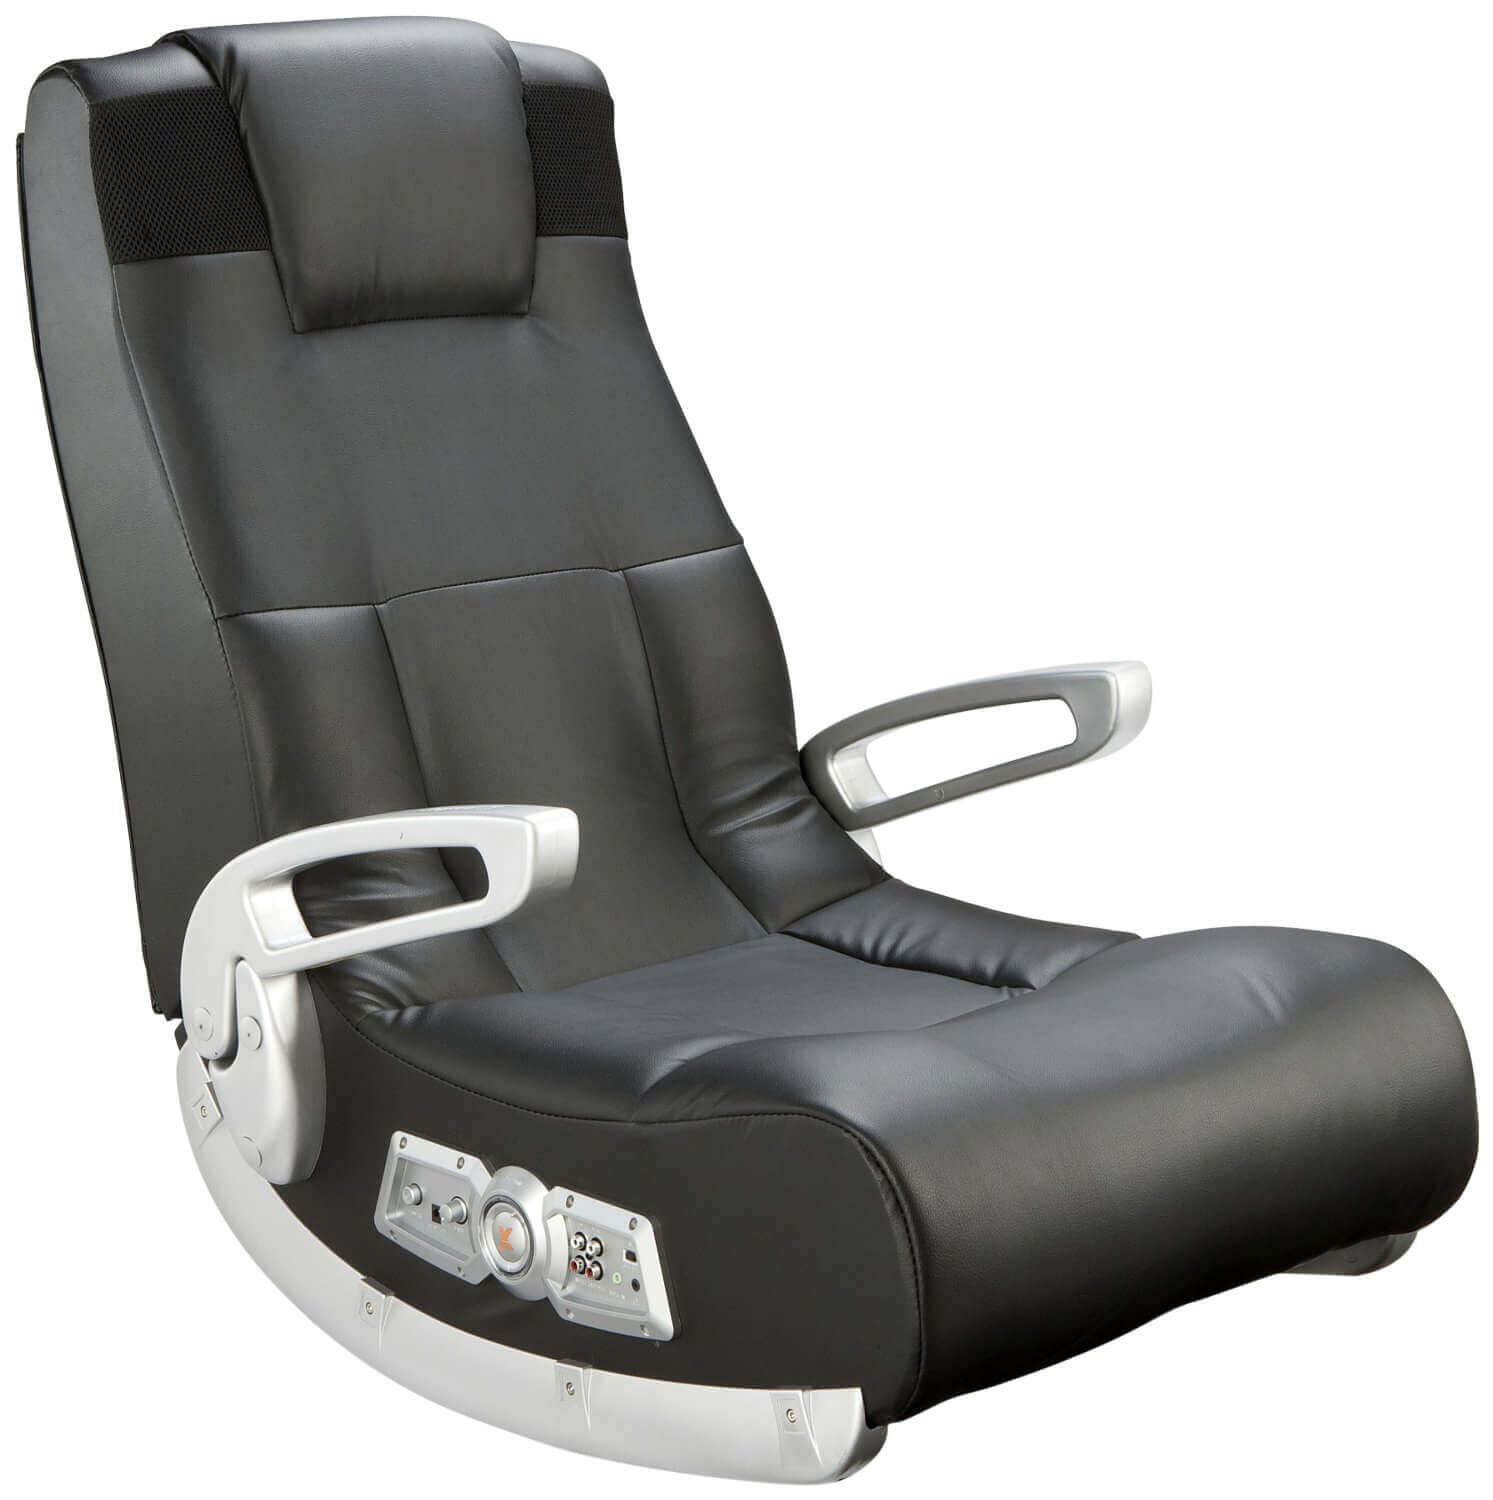 Best budget X Rocker chair? That'd be the SE II 2.1, with a model number 5143601